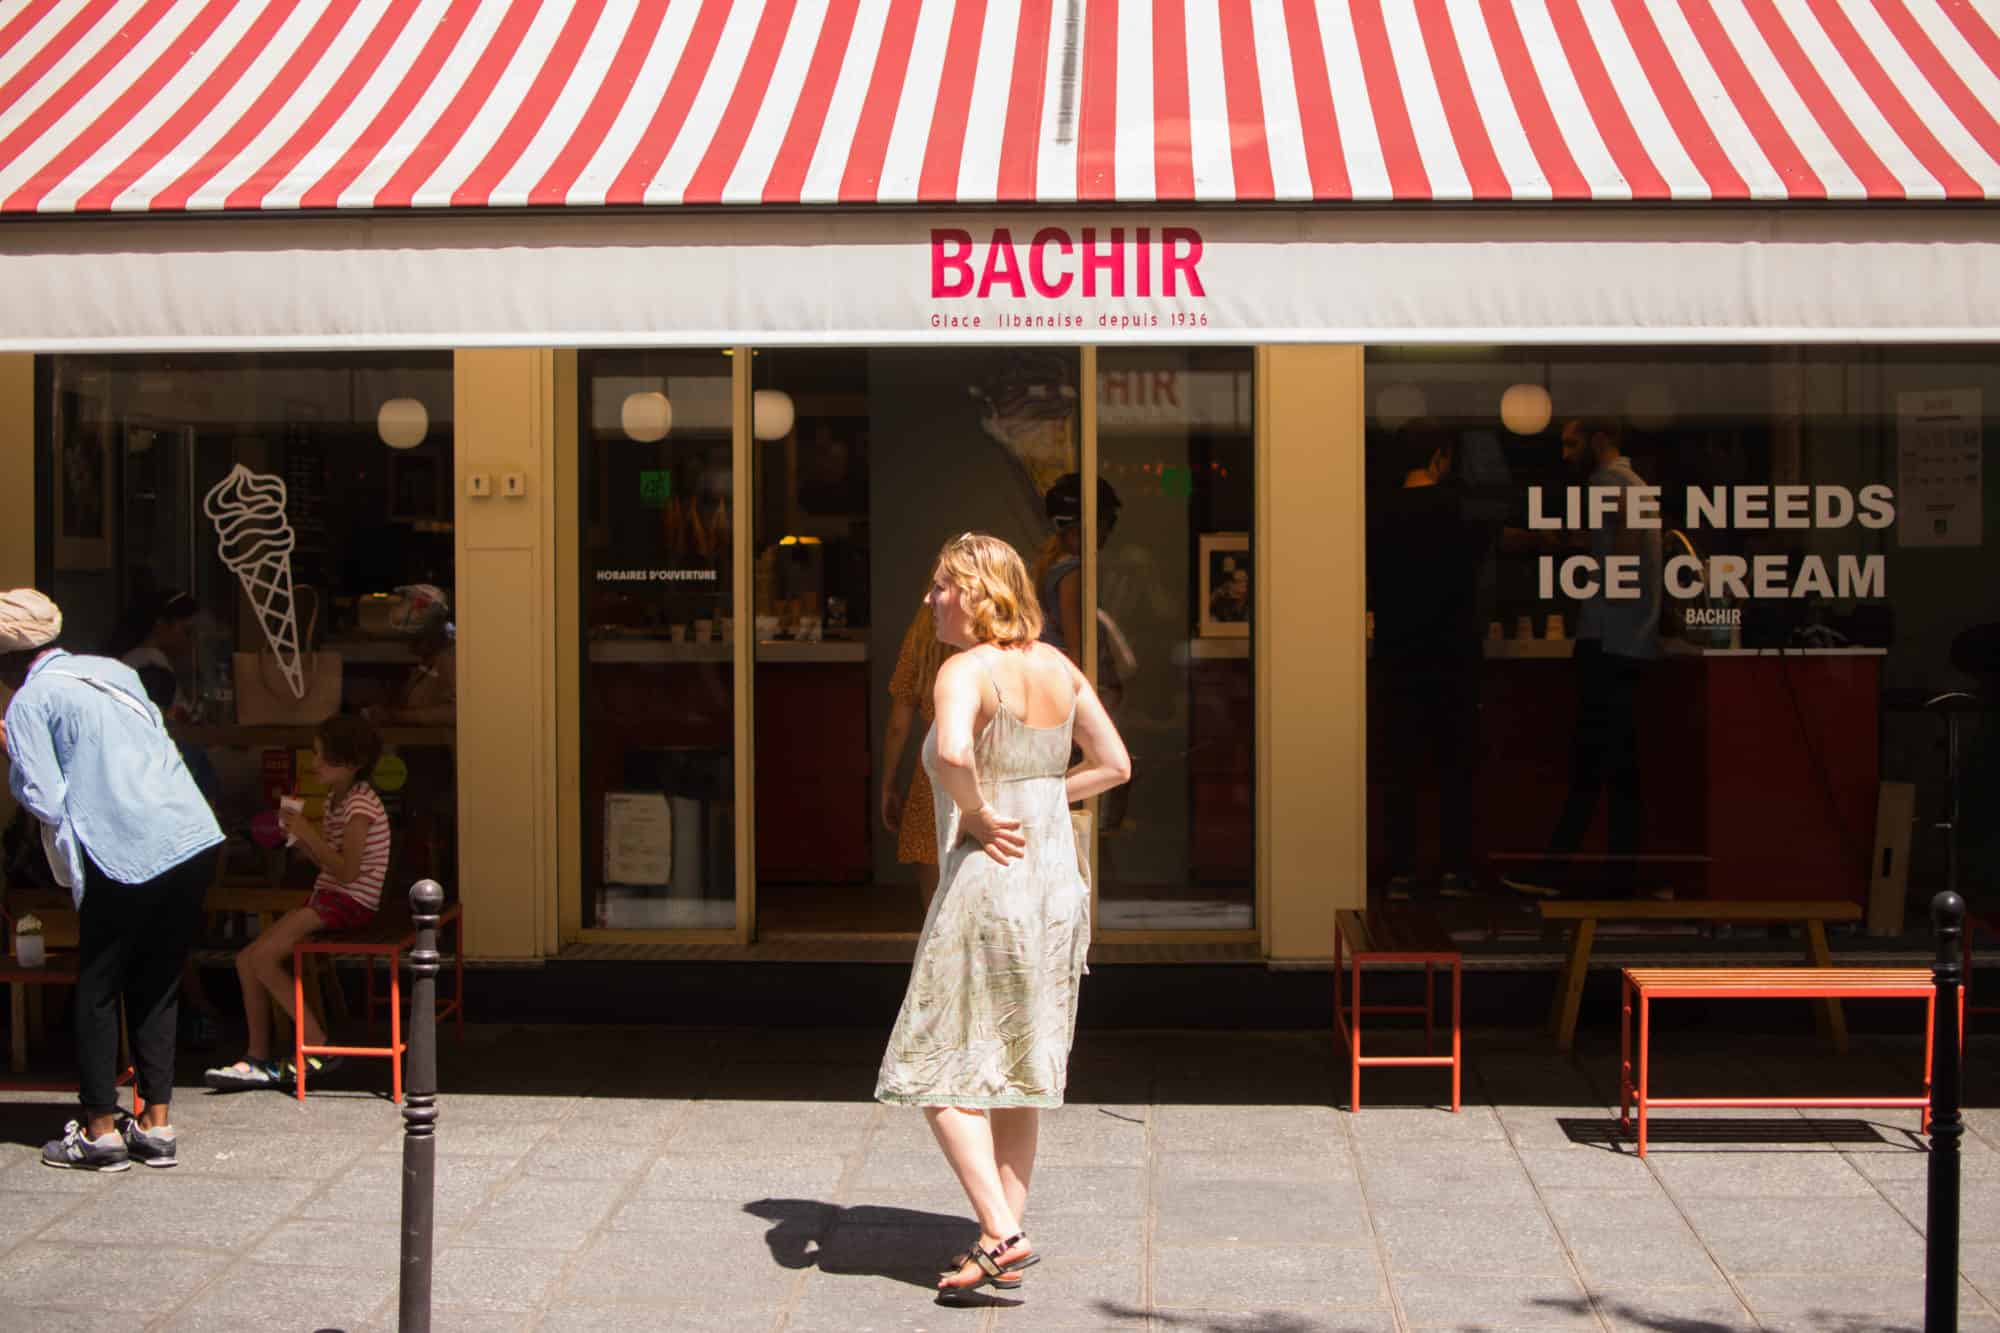 The exterior of Bachir ice cream shop in Paris with its stripy red and white awning. 